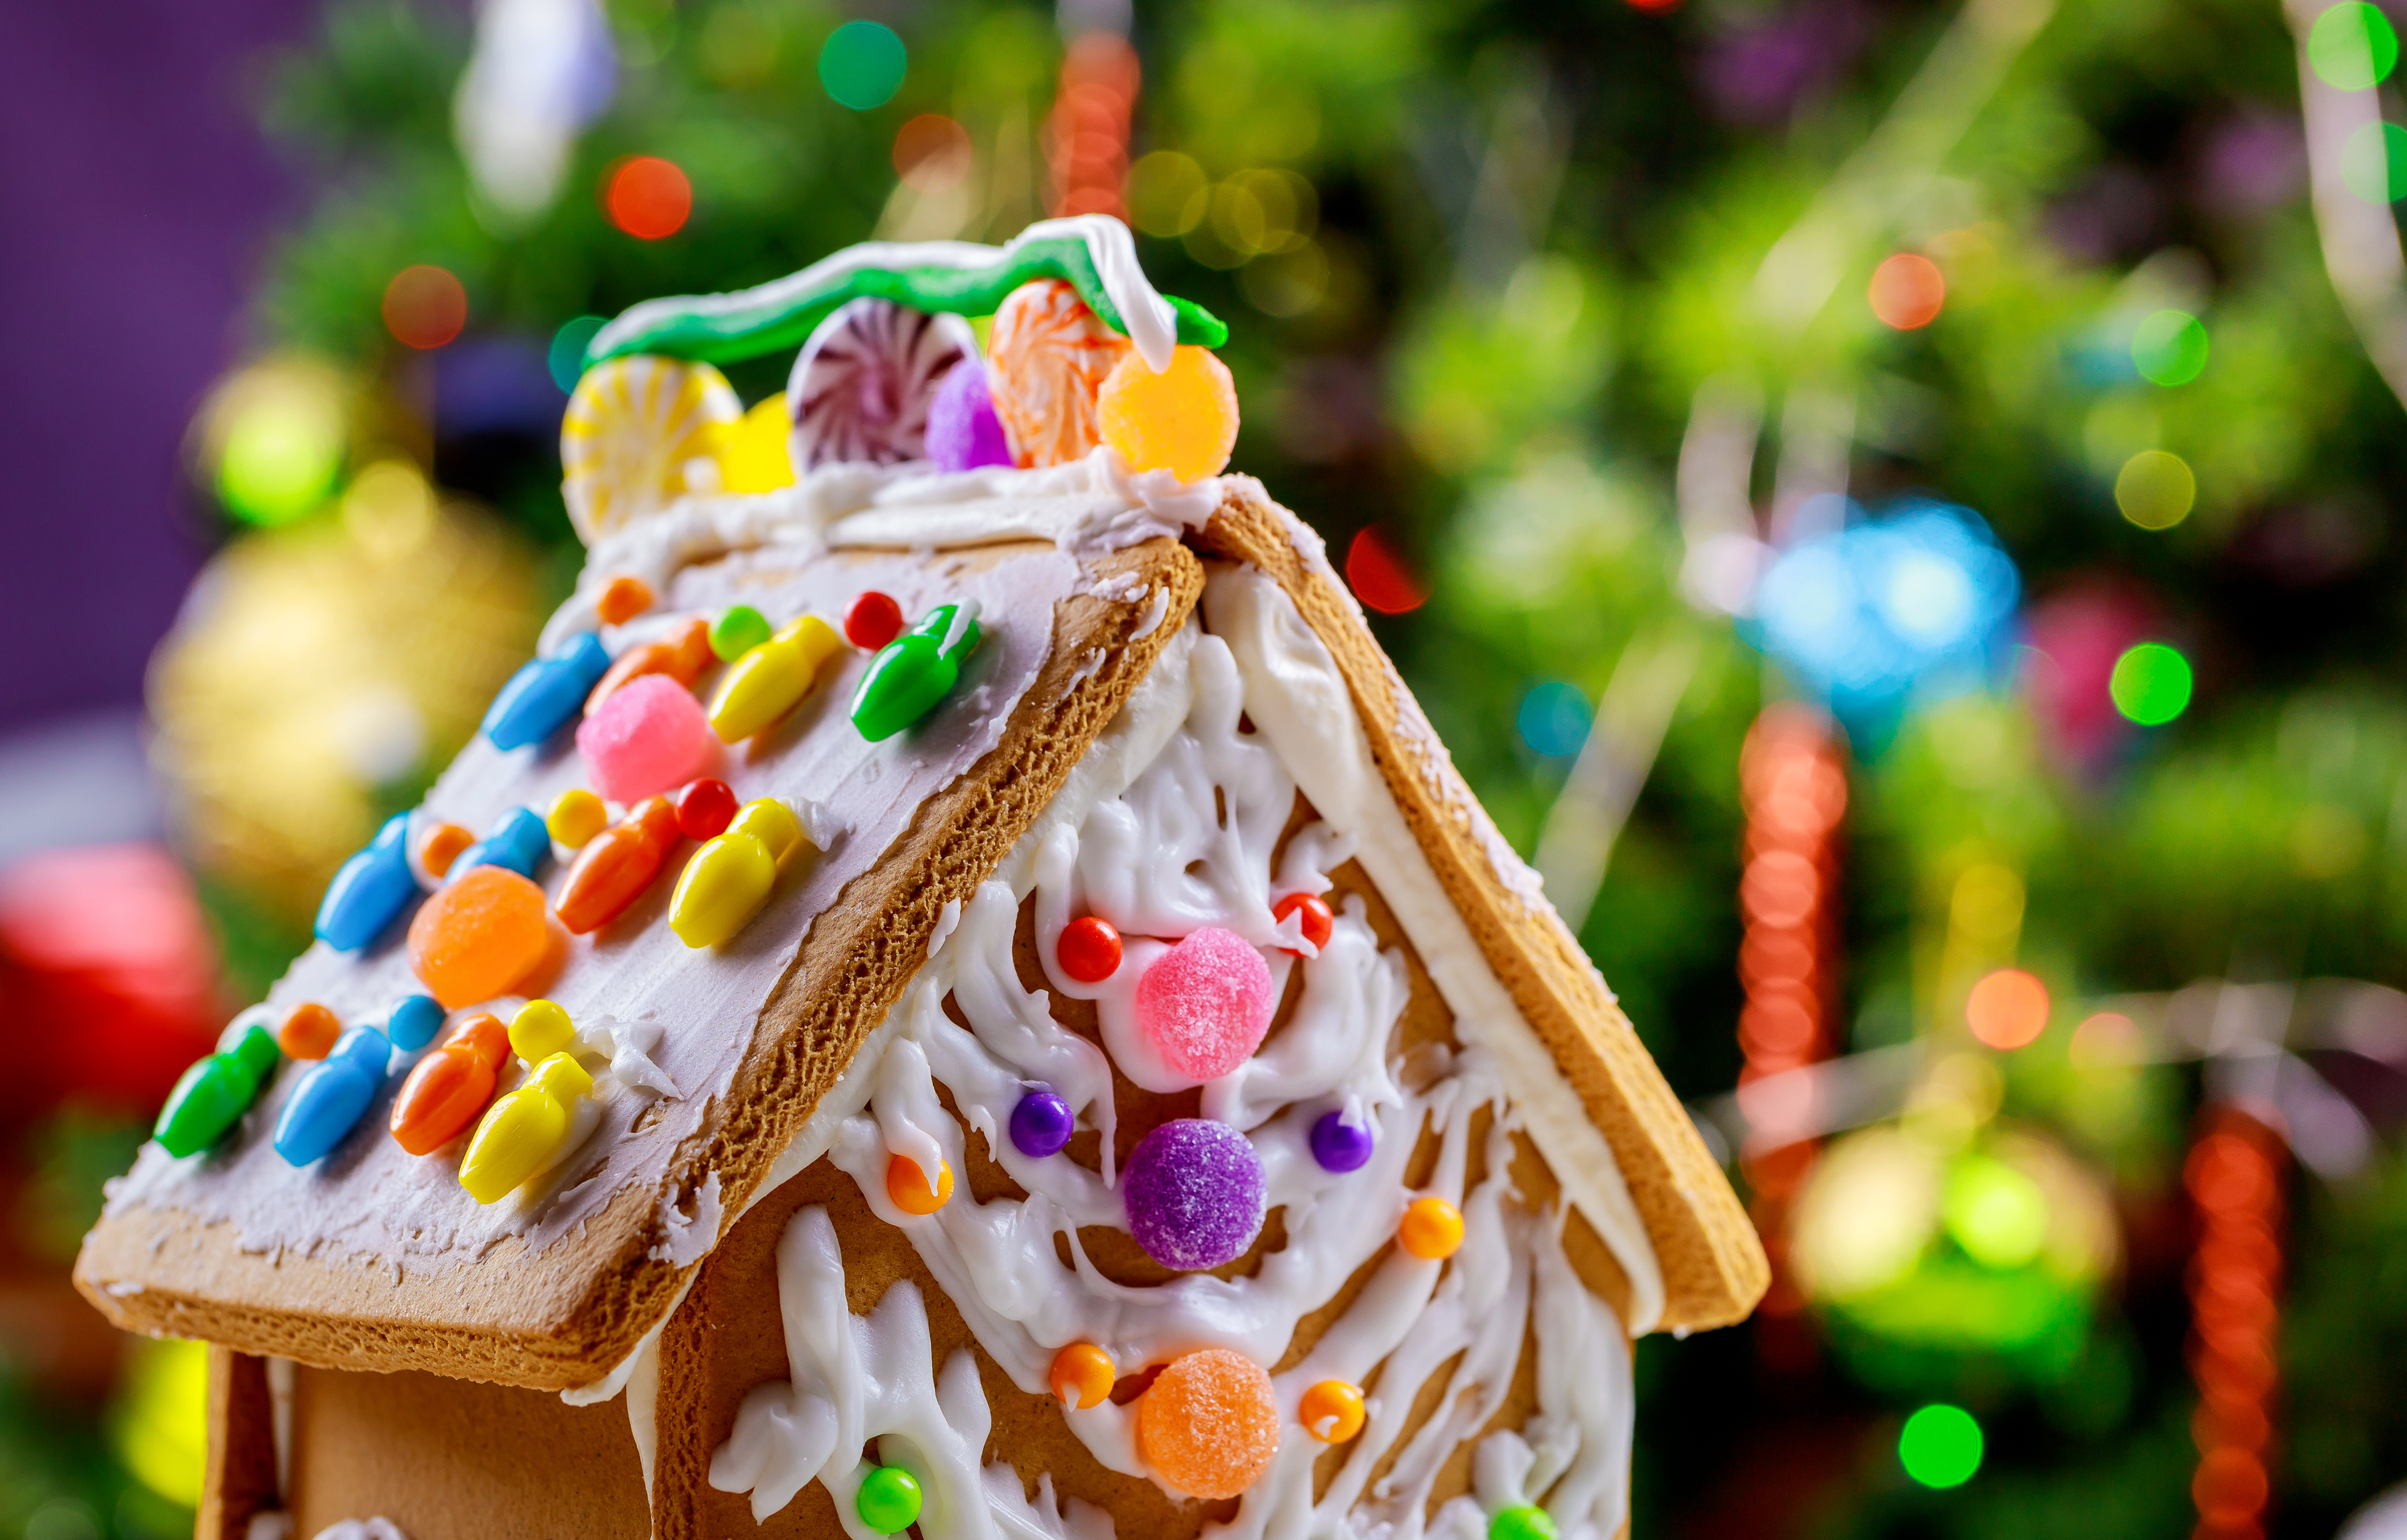 Colorful, homemade gingerbread house